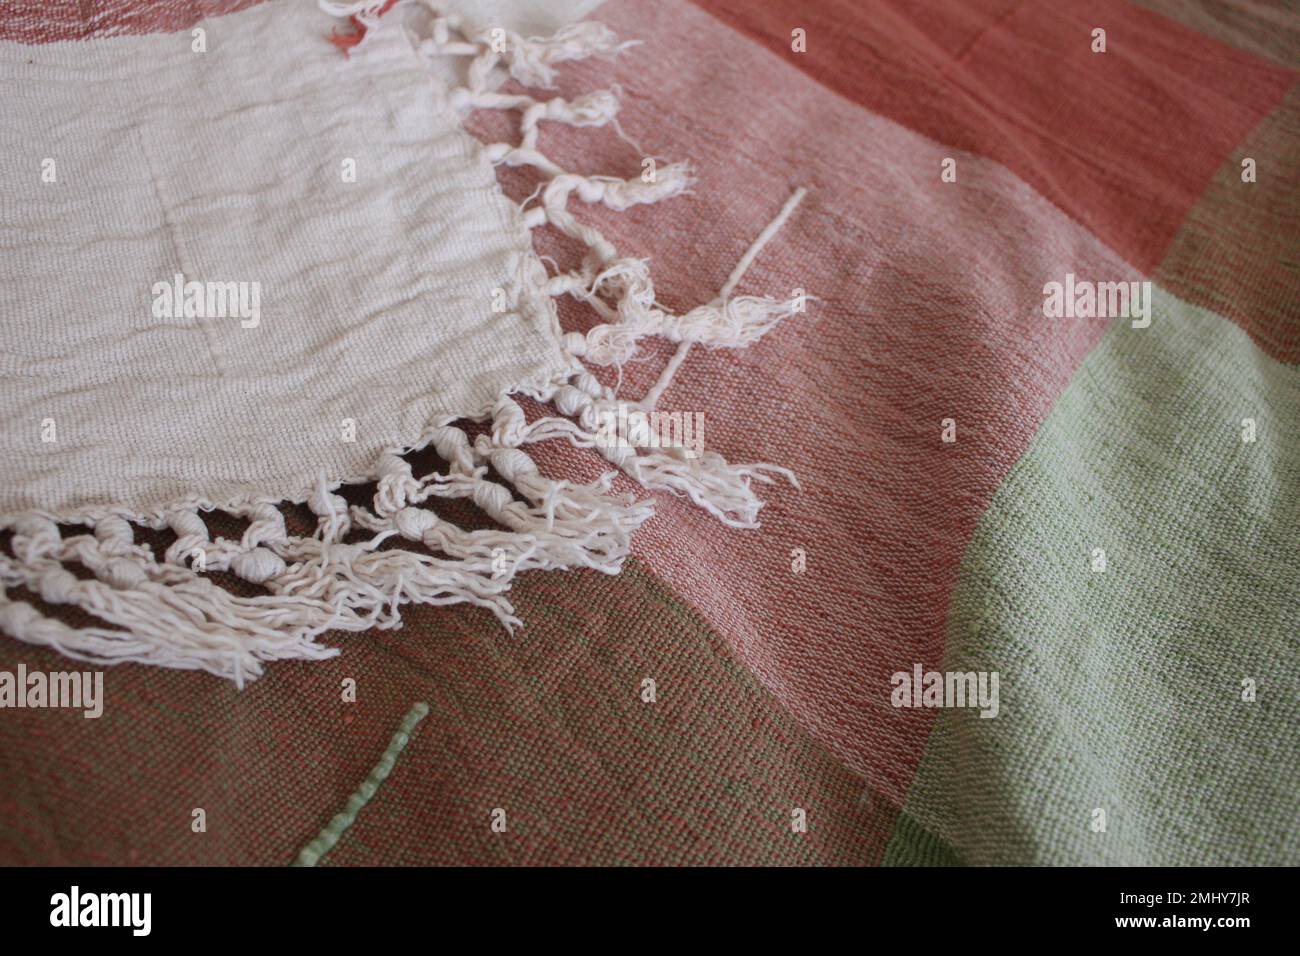 Comfortable warm cozy blanket with white tassels Stock Photo